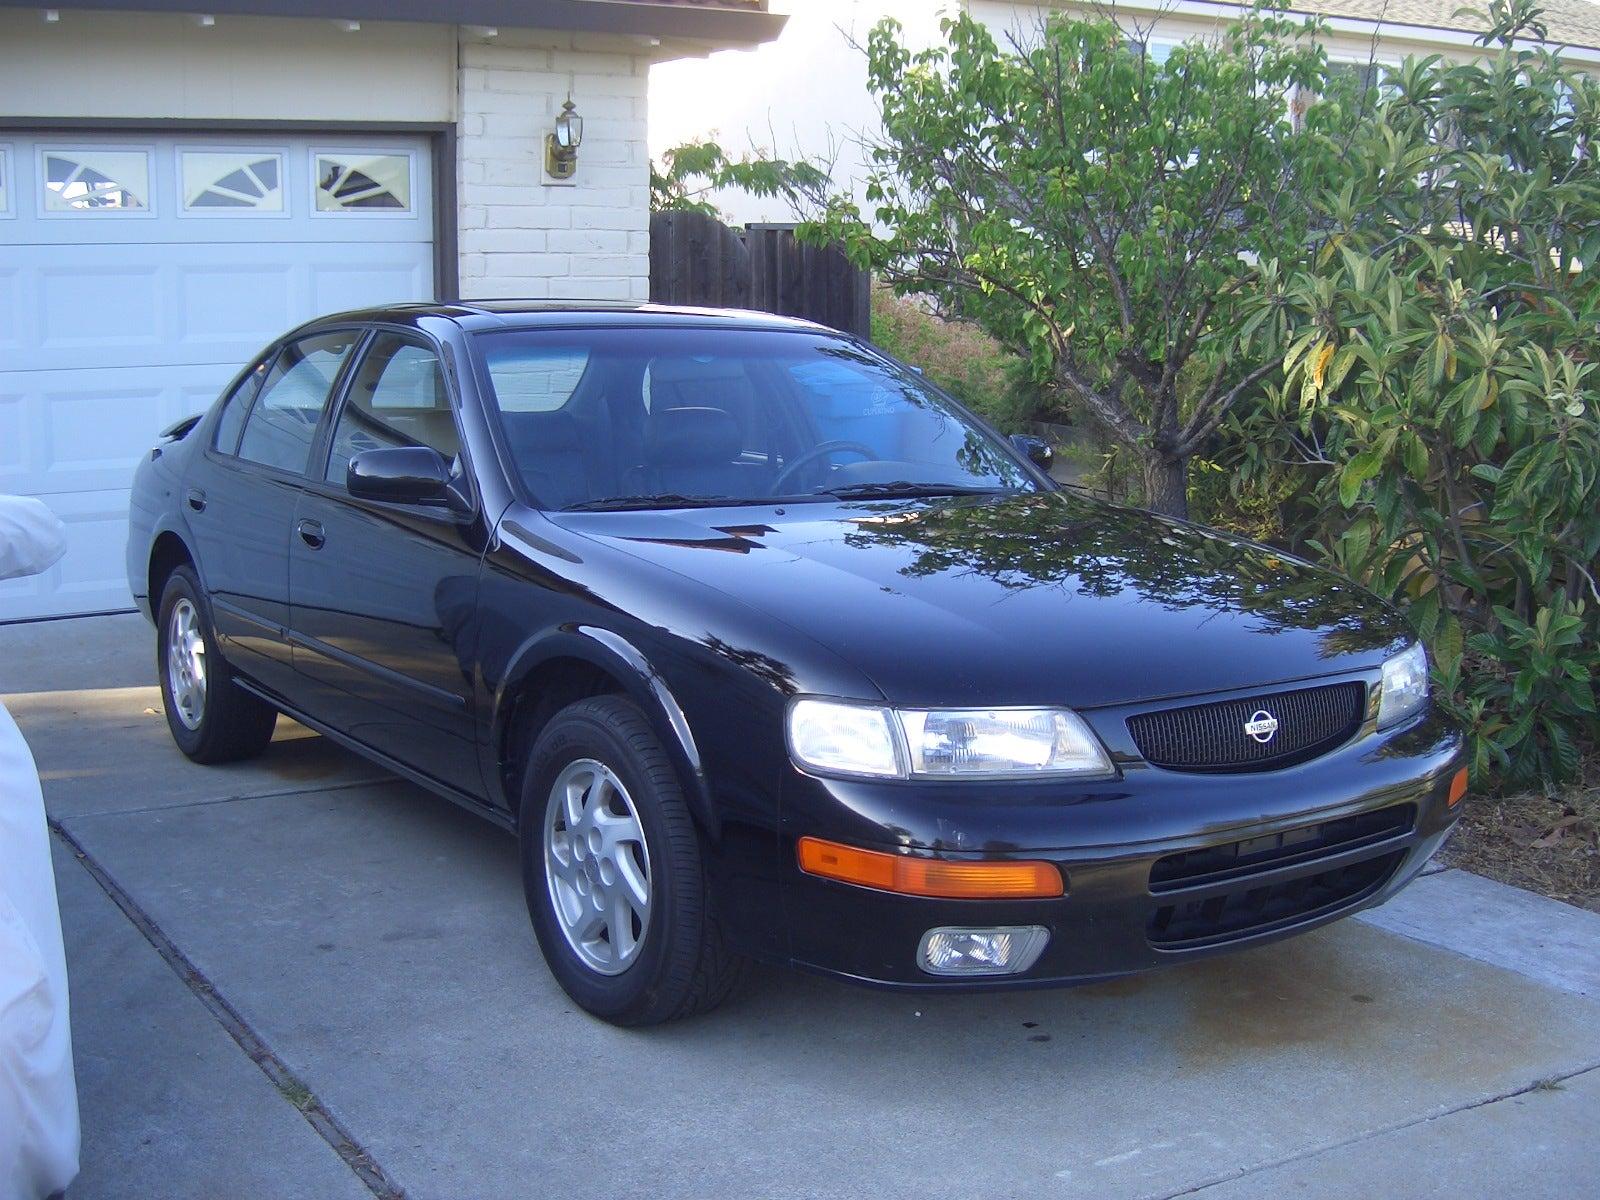 Picture of the 1996 nissan maxima #6